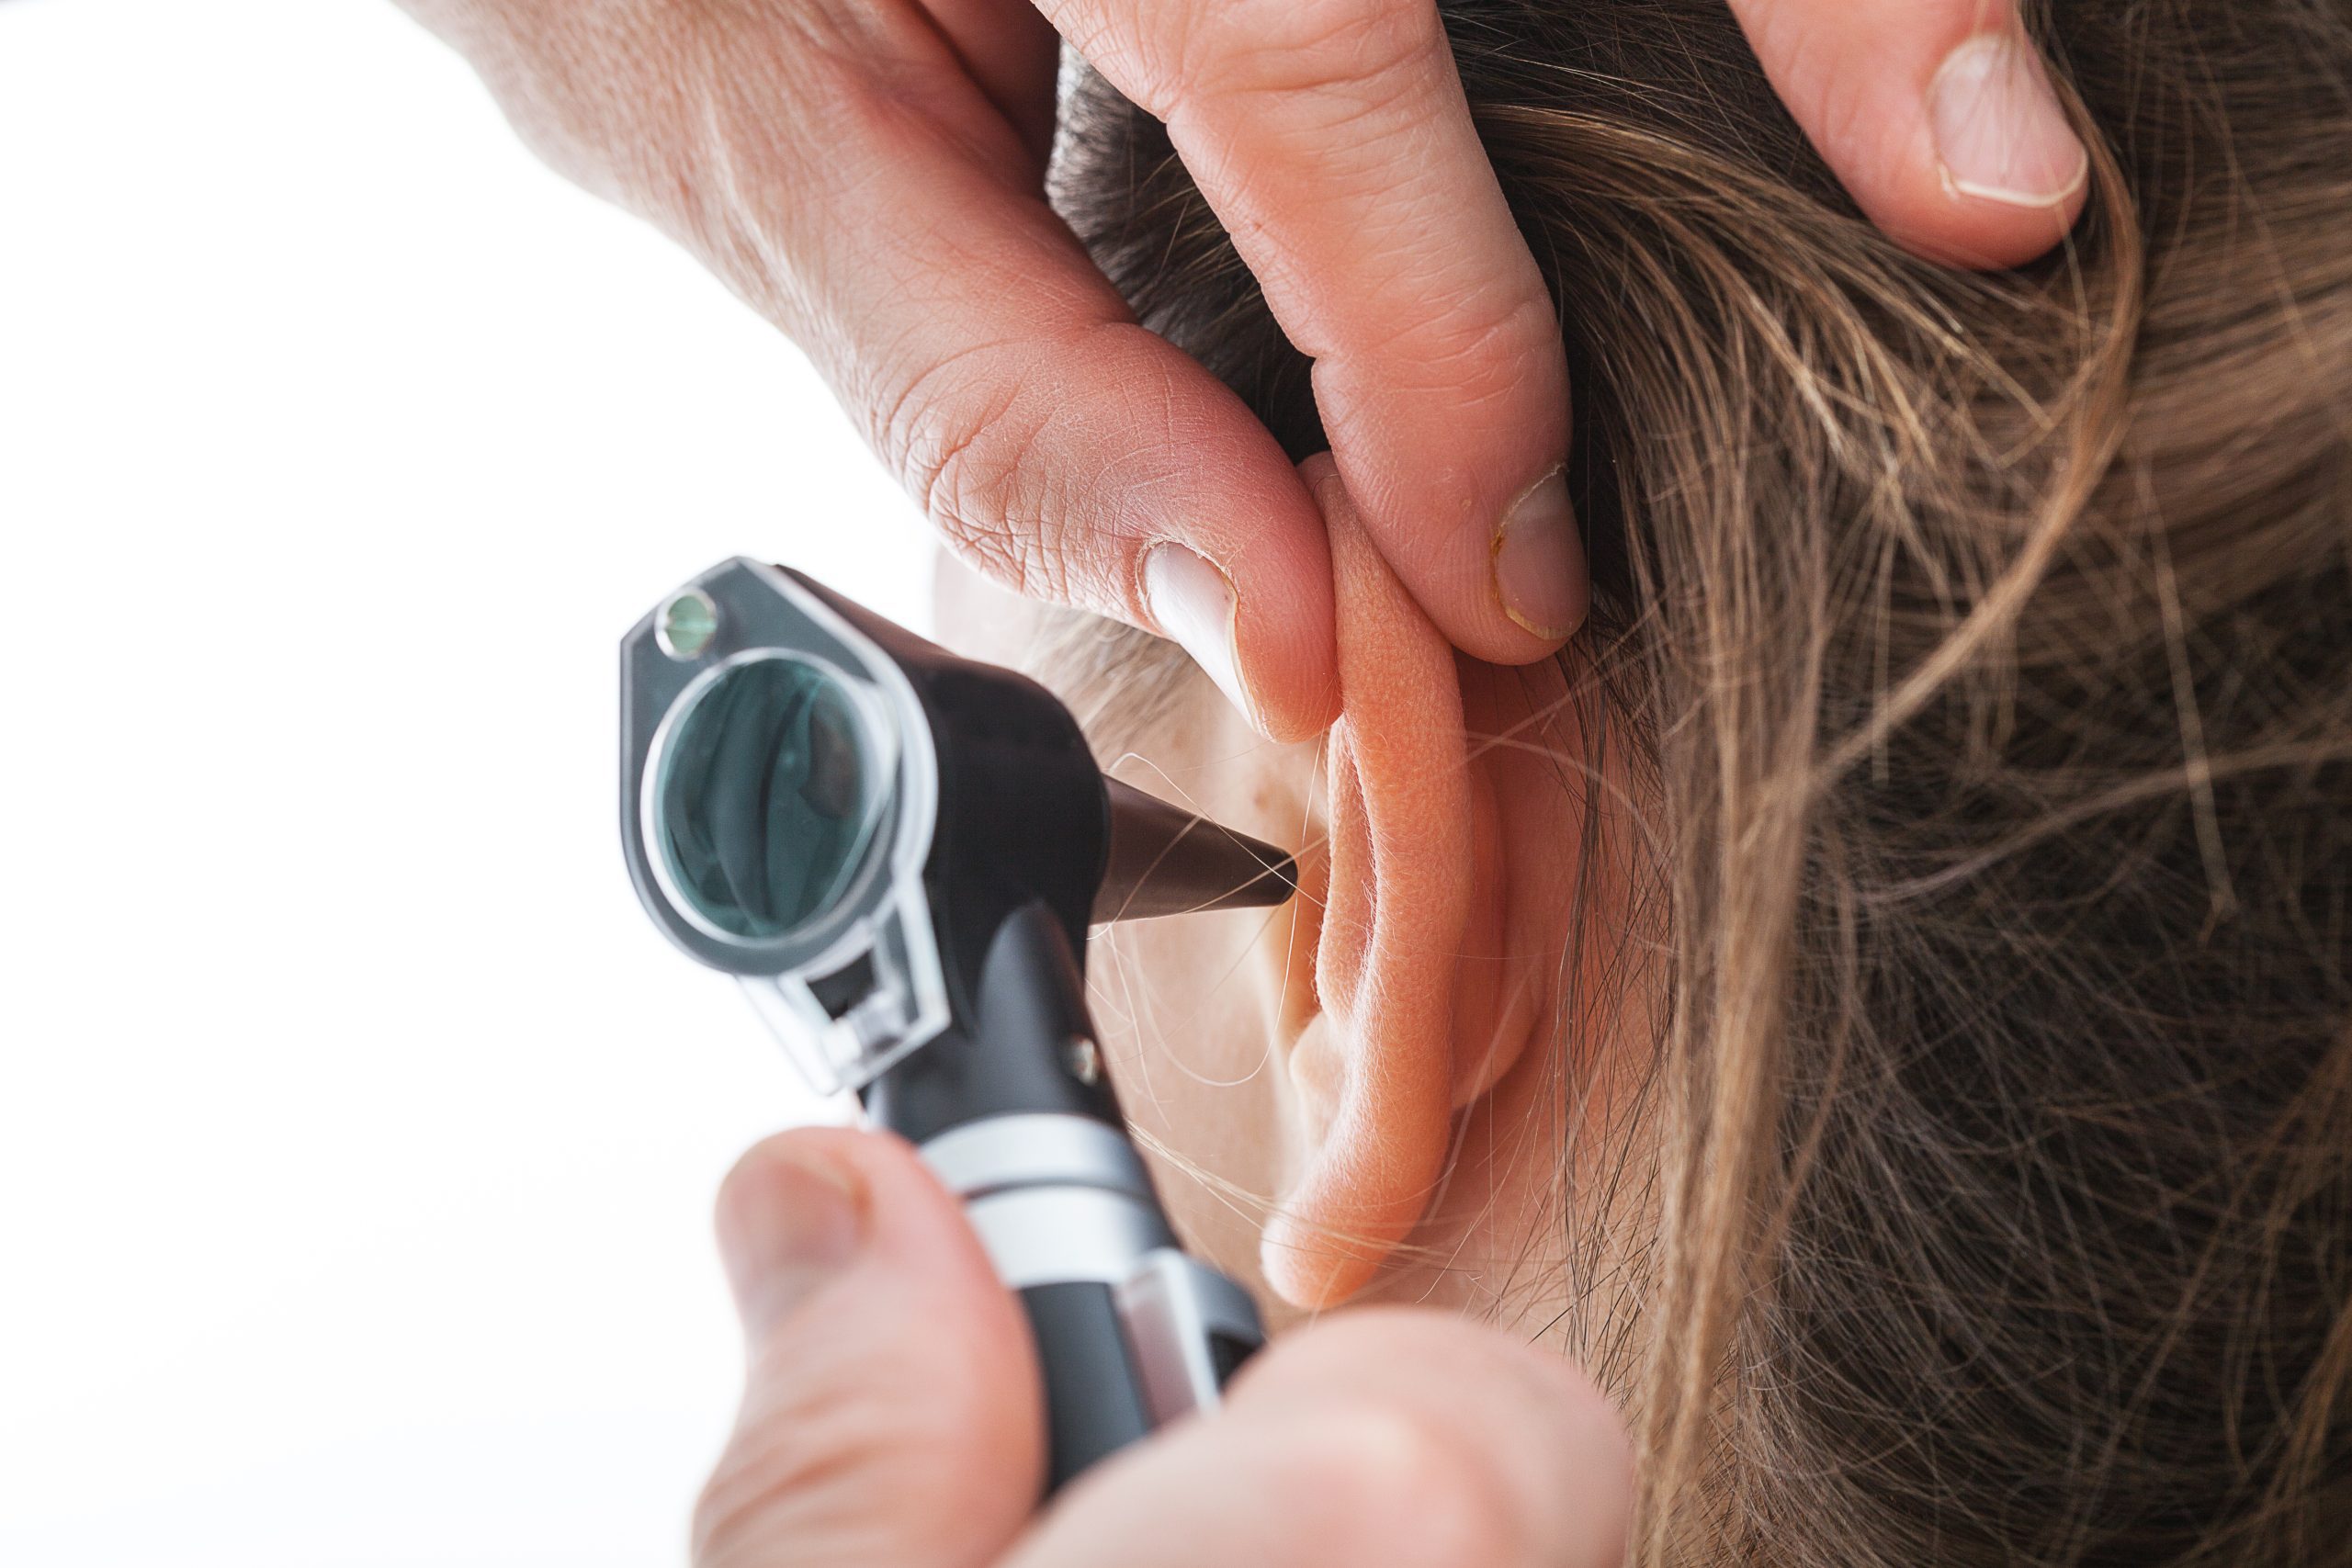 Should I go to a Registered Hearing Aid Practitioner (RHAP) for a hearing test?